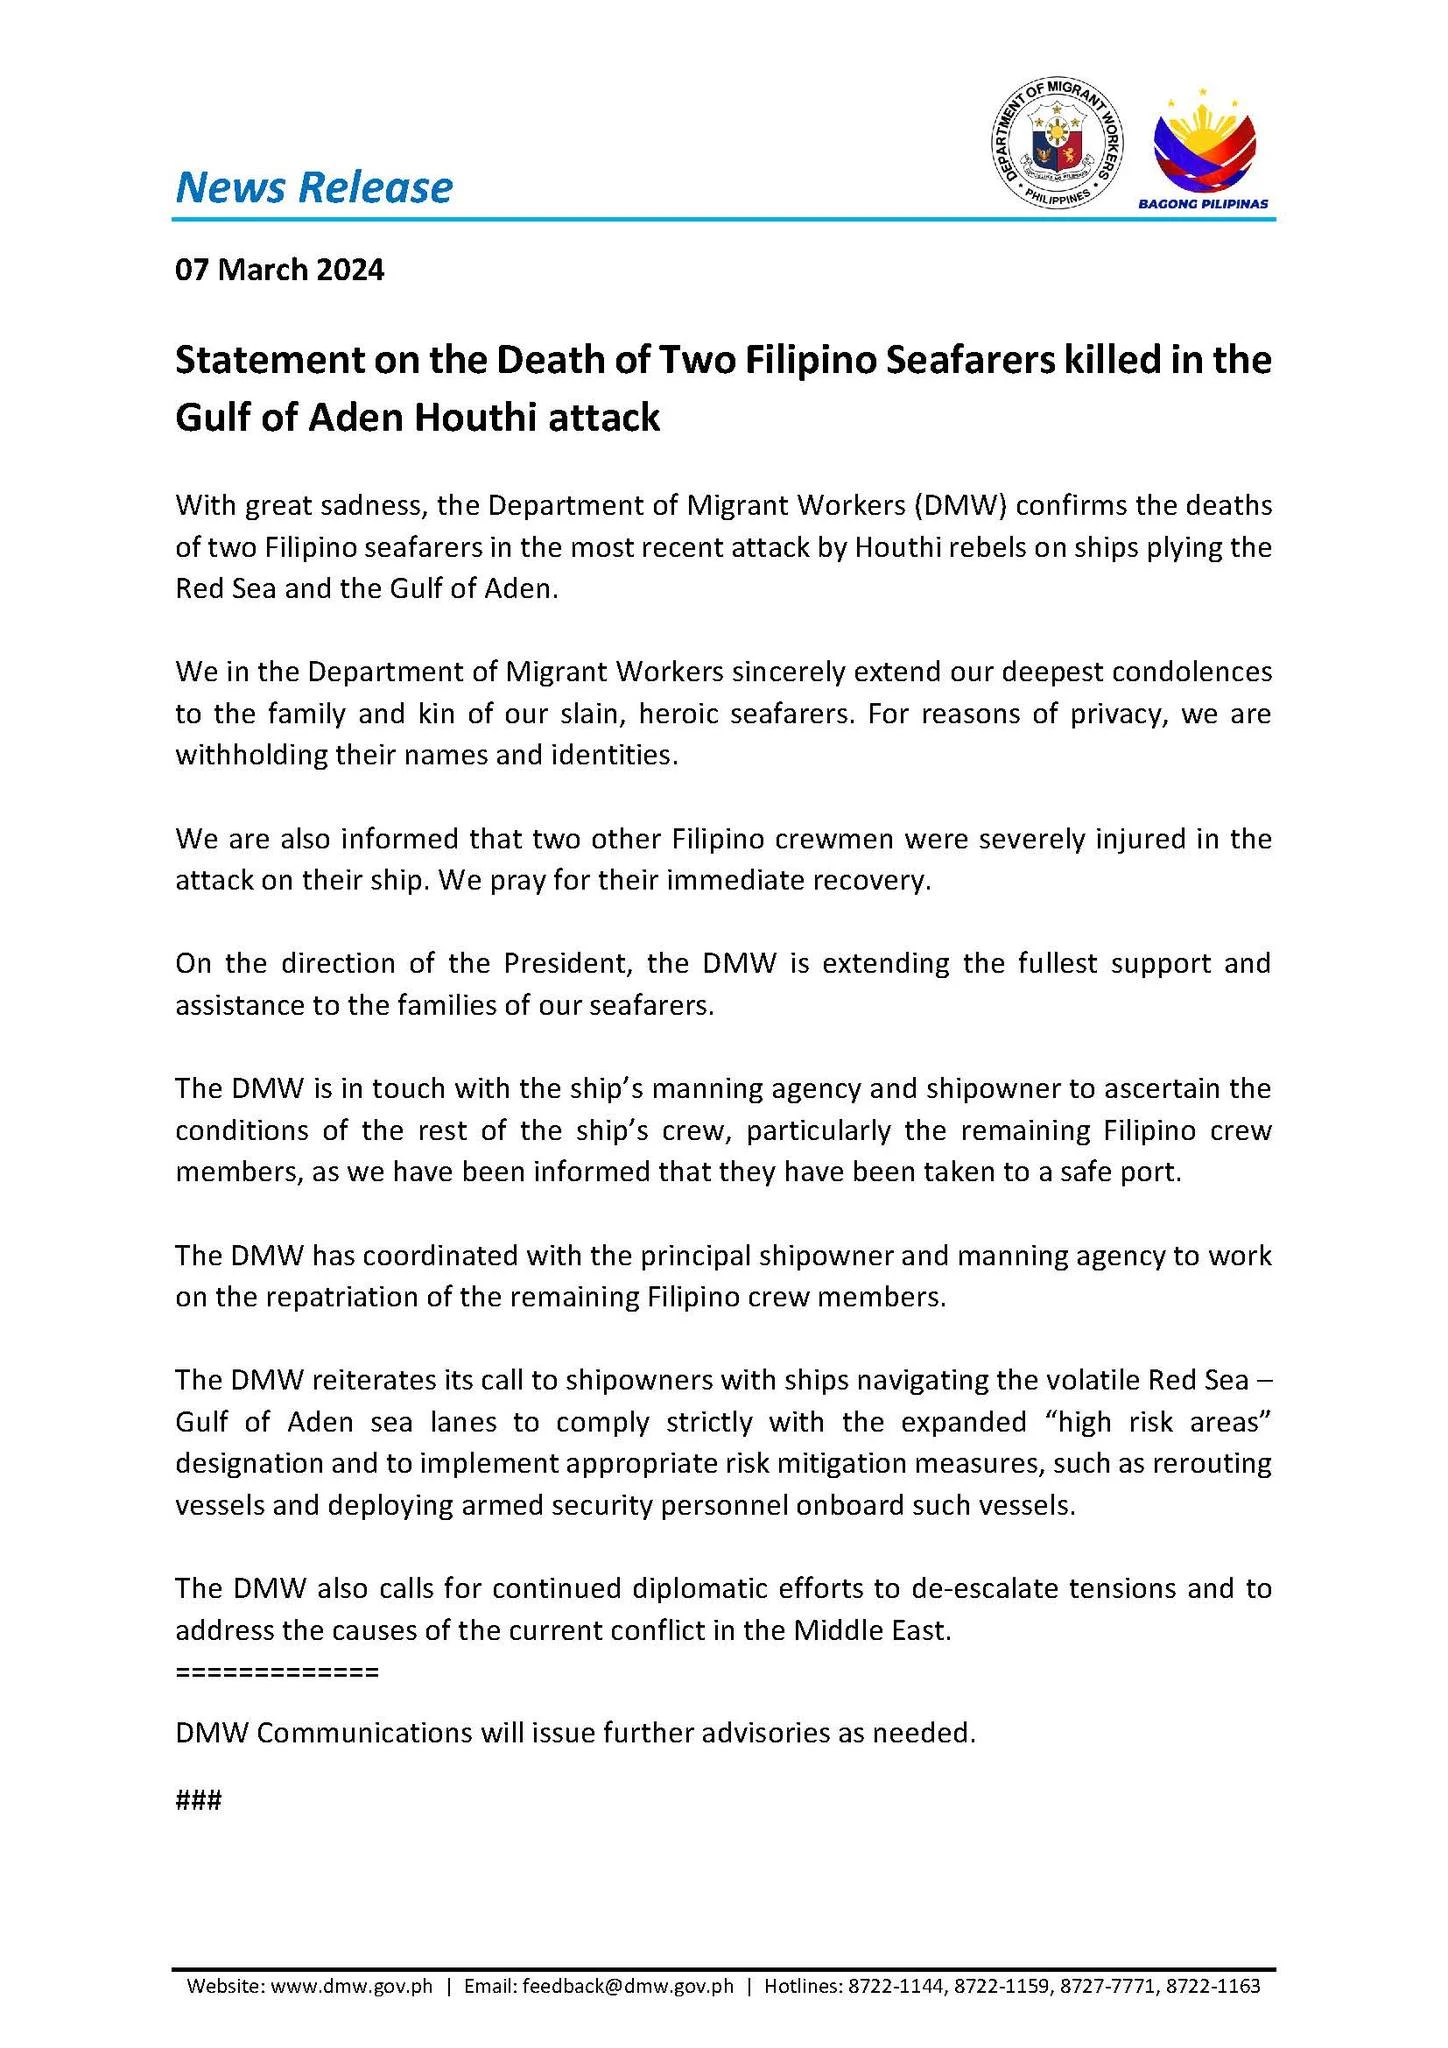 Department of Migrant Workers Statement on the Death of Two Filipino Seafarers killed in the Gulf of Aden Houthi attack - Issued 07 March 2024